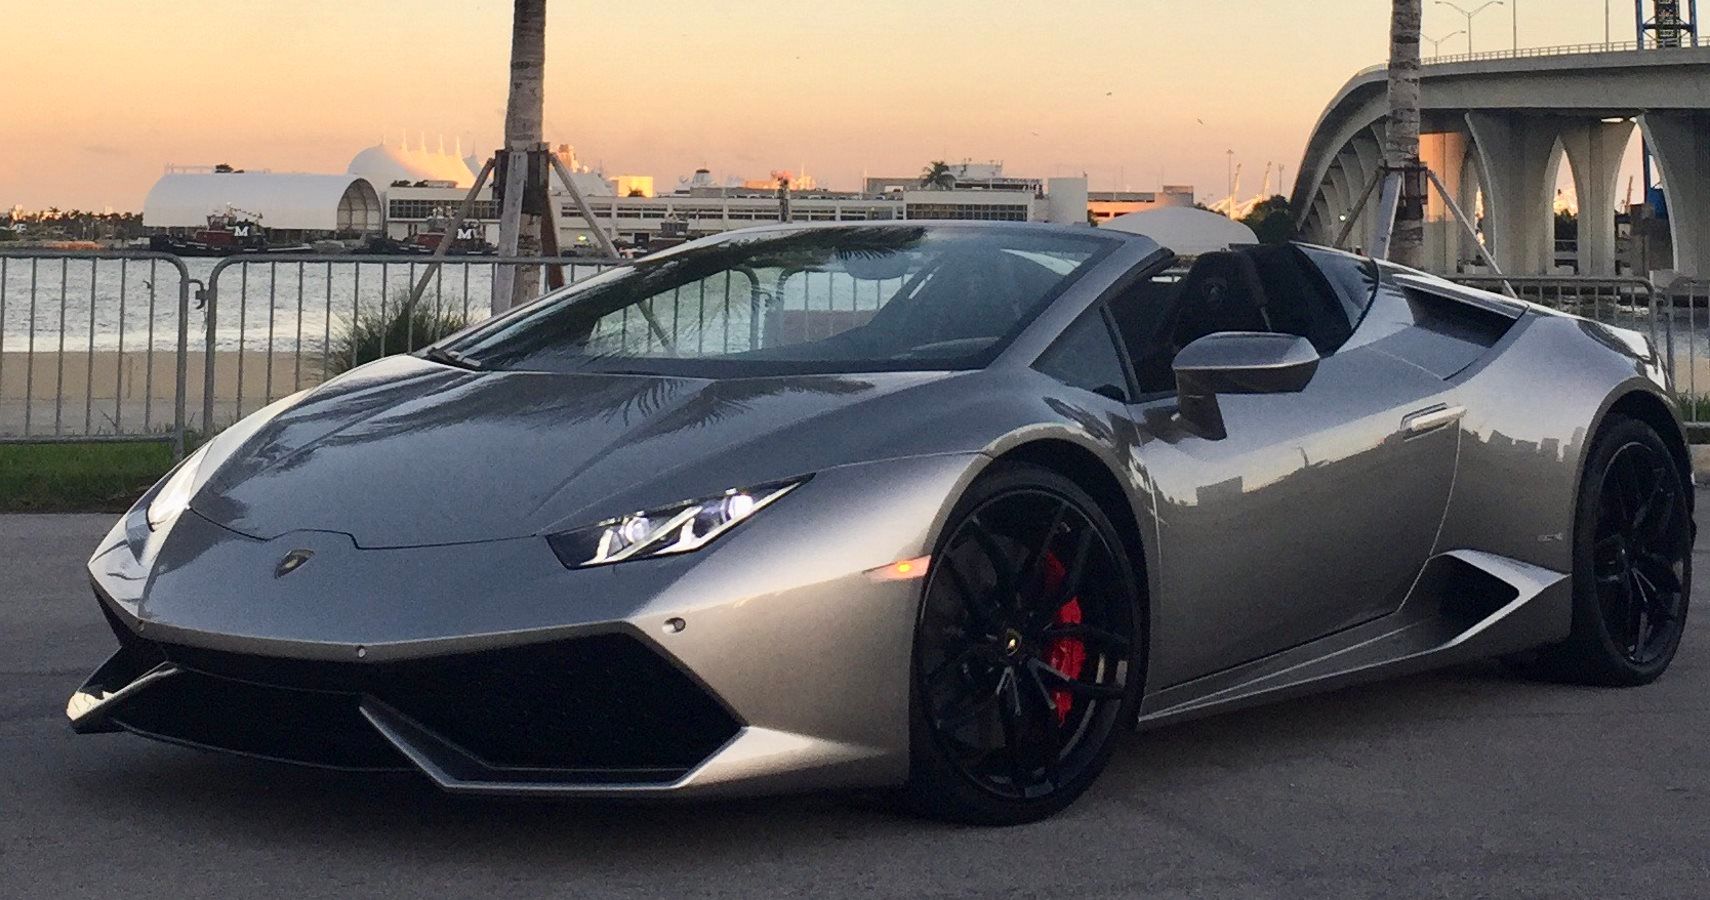 Lamborghini’s Revamped Huracan Spyder Spotted With New Bumpers & Exhaust